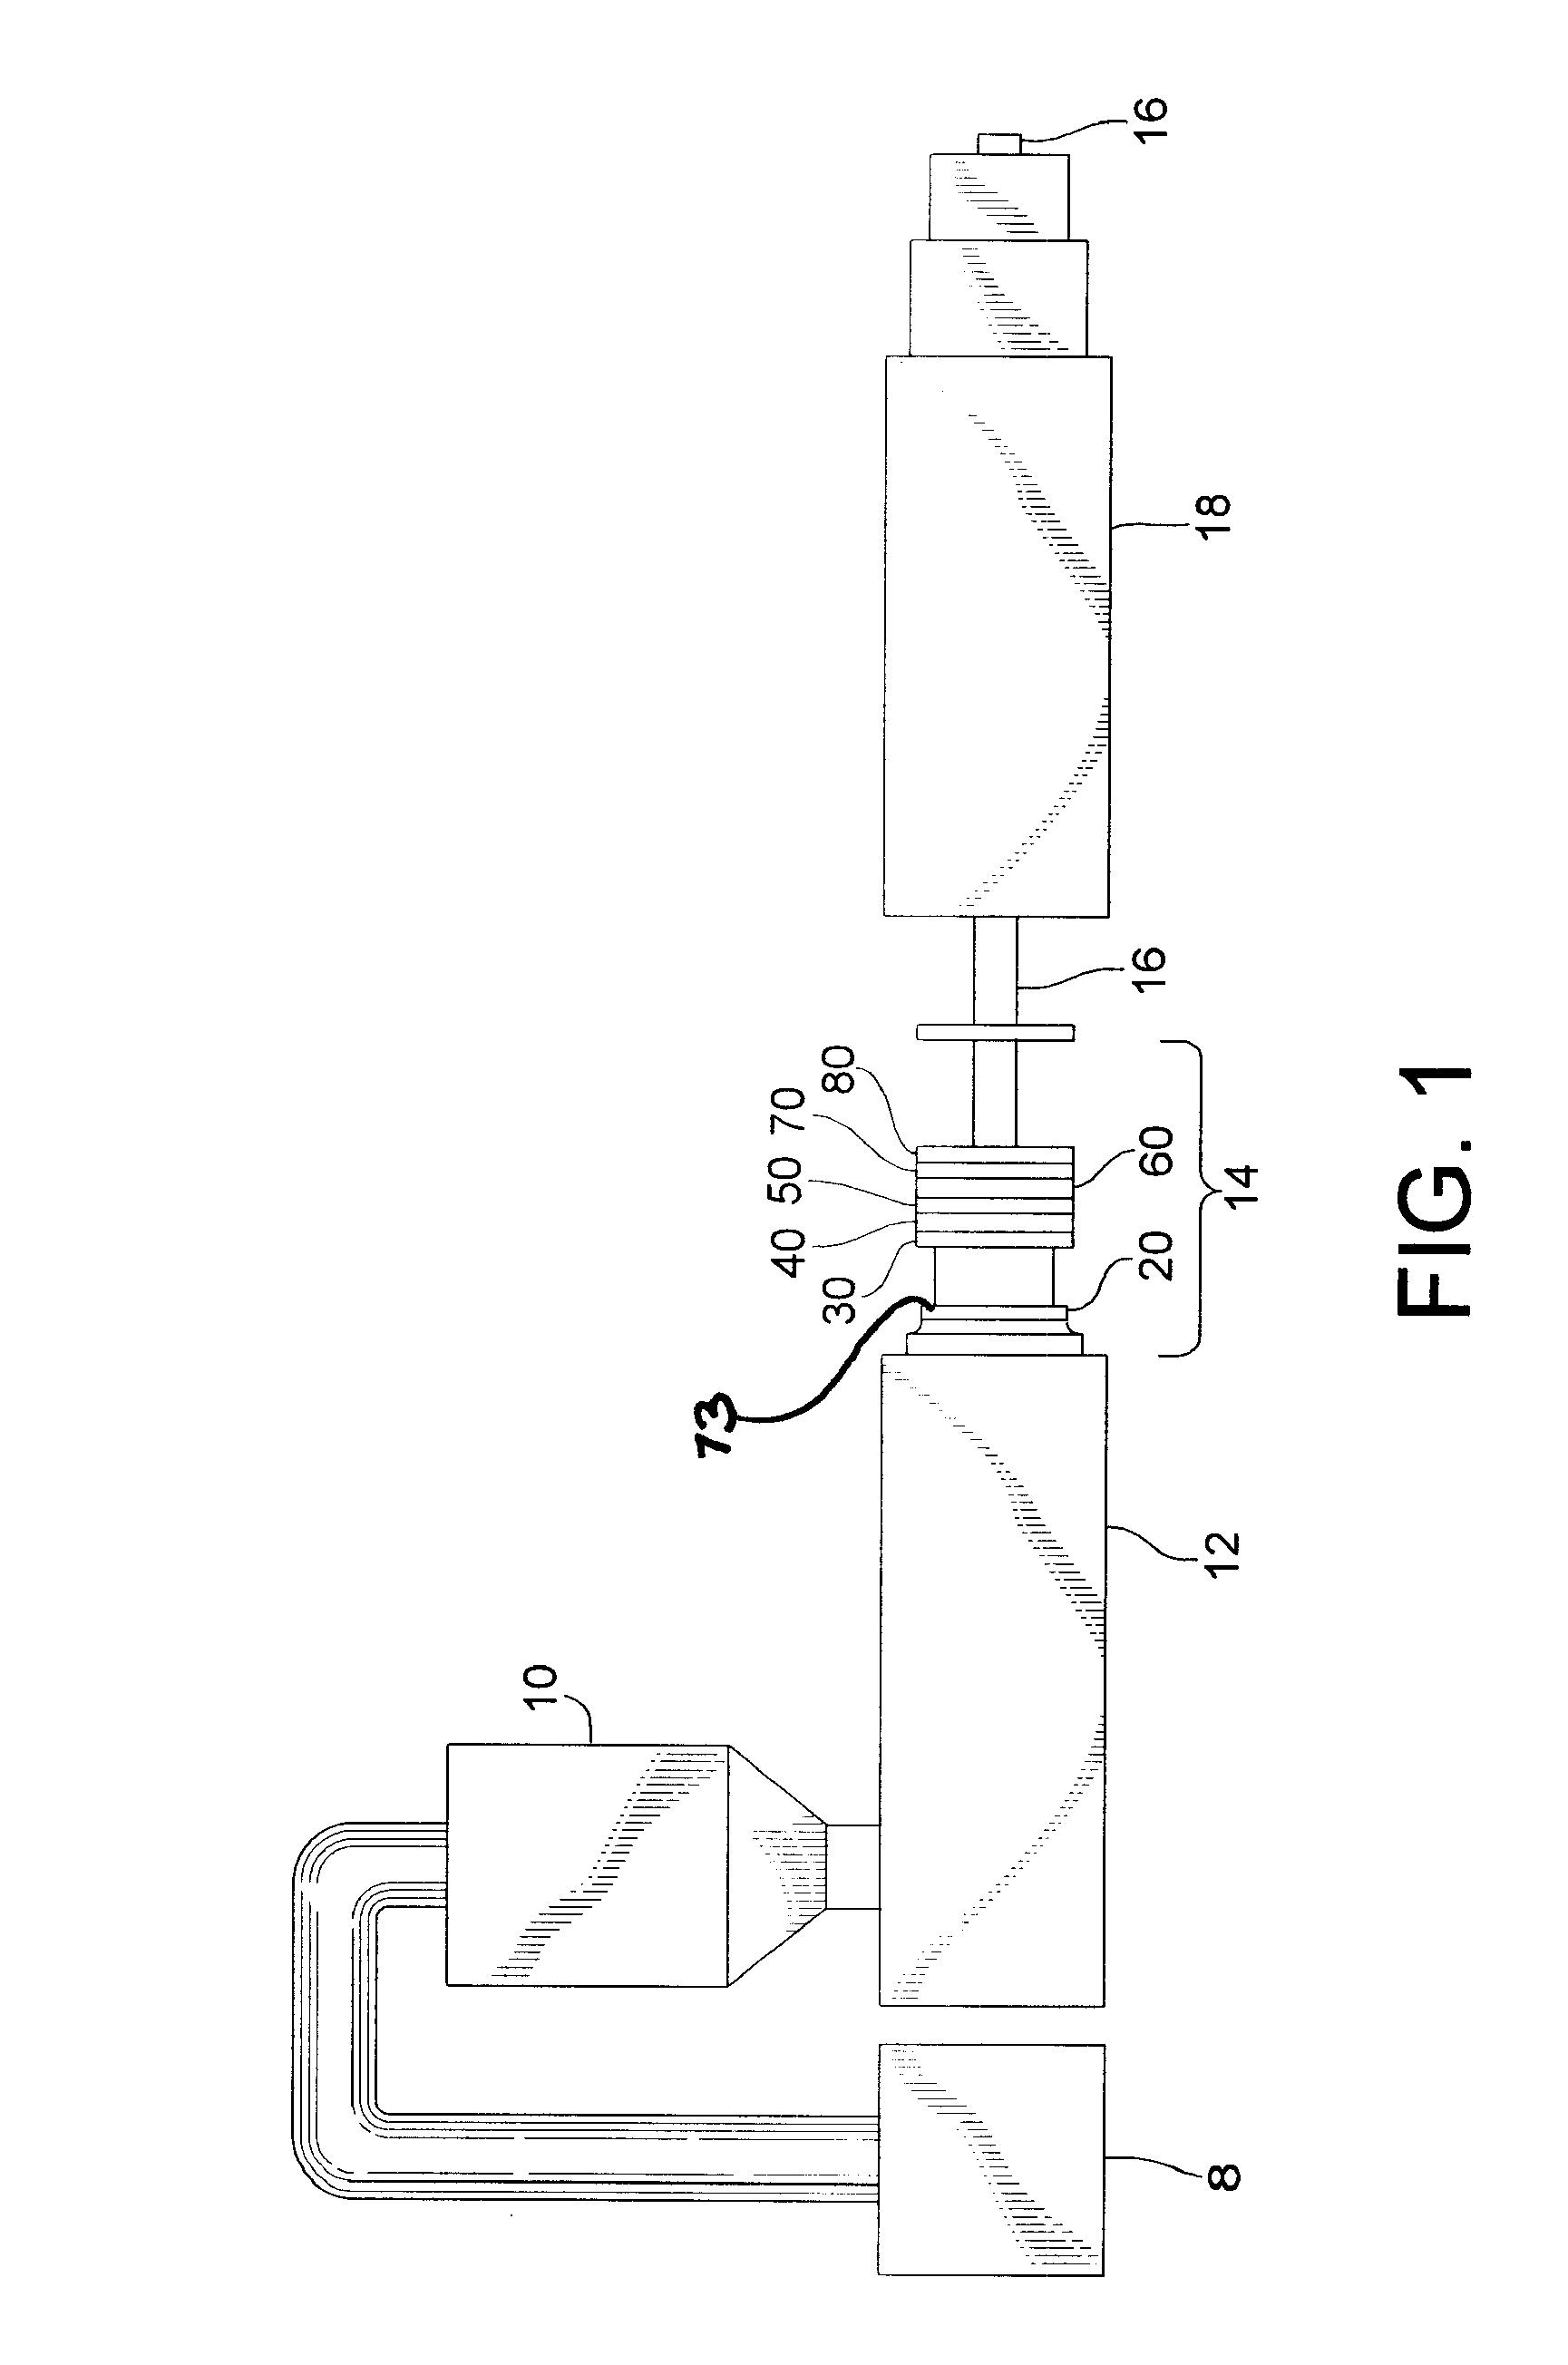 Extruded cellulose-polymer composition and system for making same